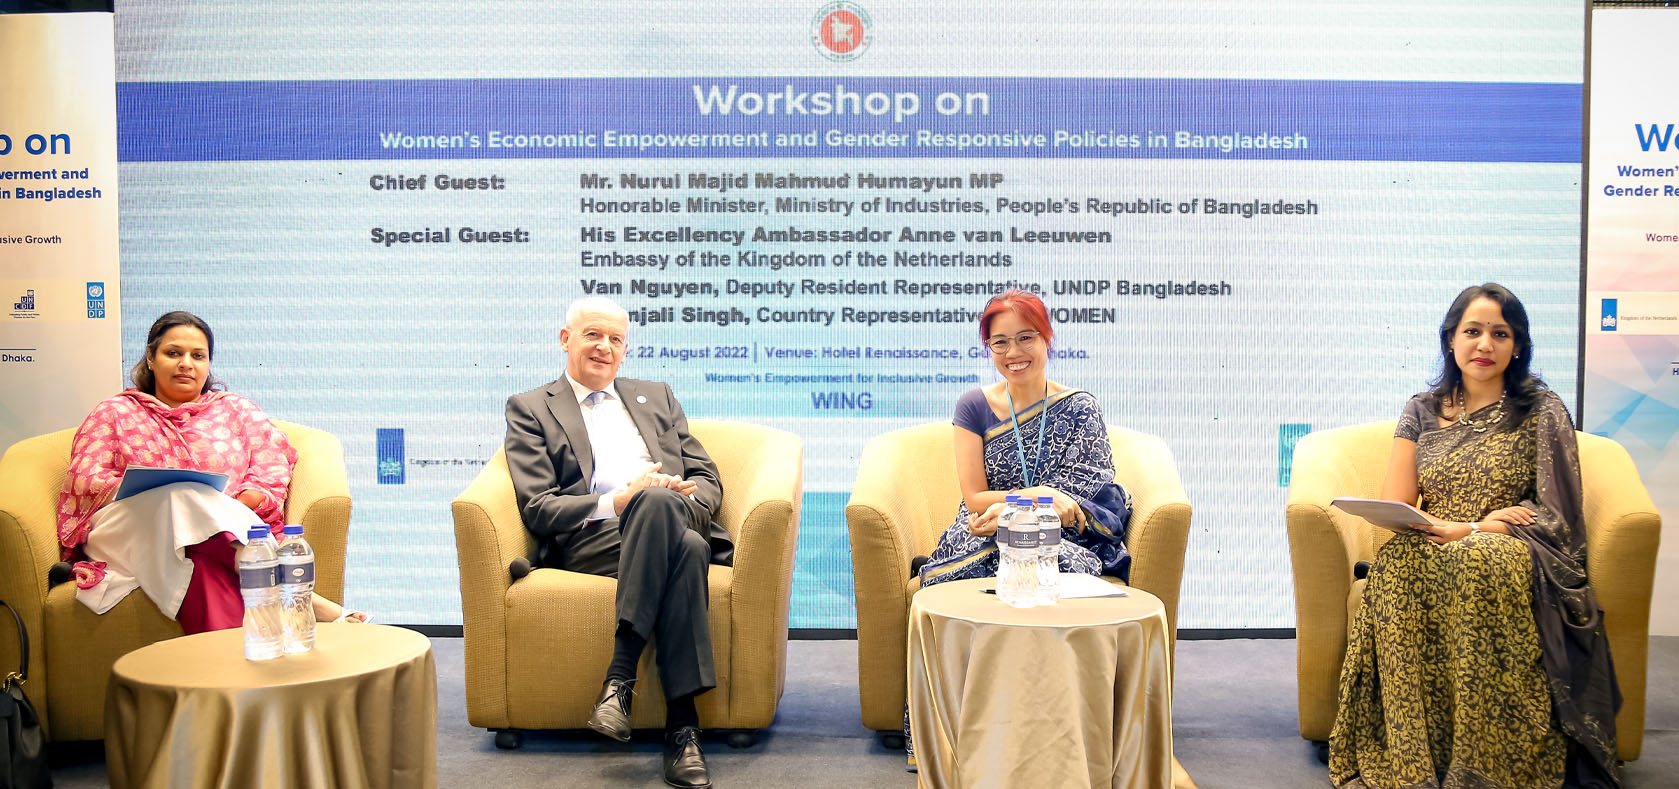 The Country Representative of UN Women Bangladesh Gitanjali Singh (left)) attends a national dialogue on “Women's Economic Empowerment and Gender Responsive Policies in Bangladesh” on 22 August in Dhaka, as a special guest. Photo: UNDP